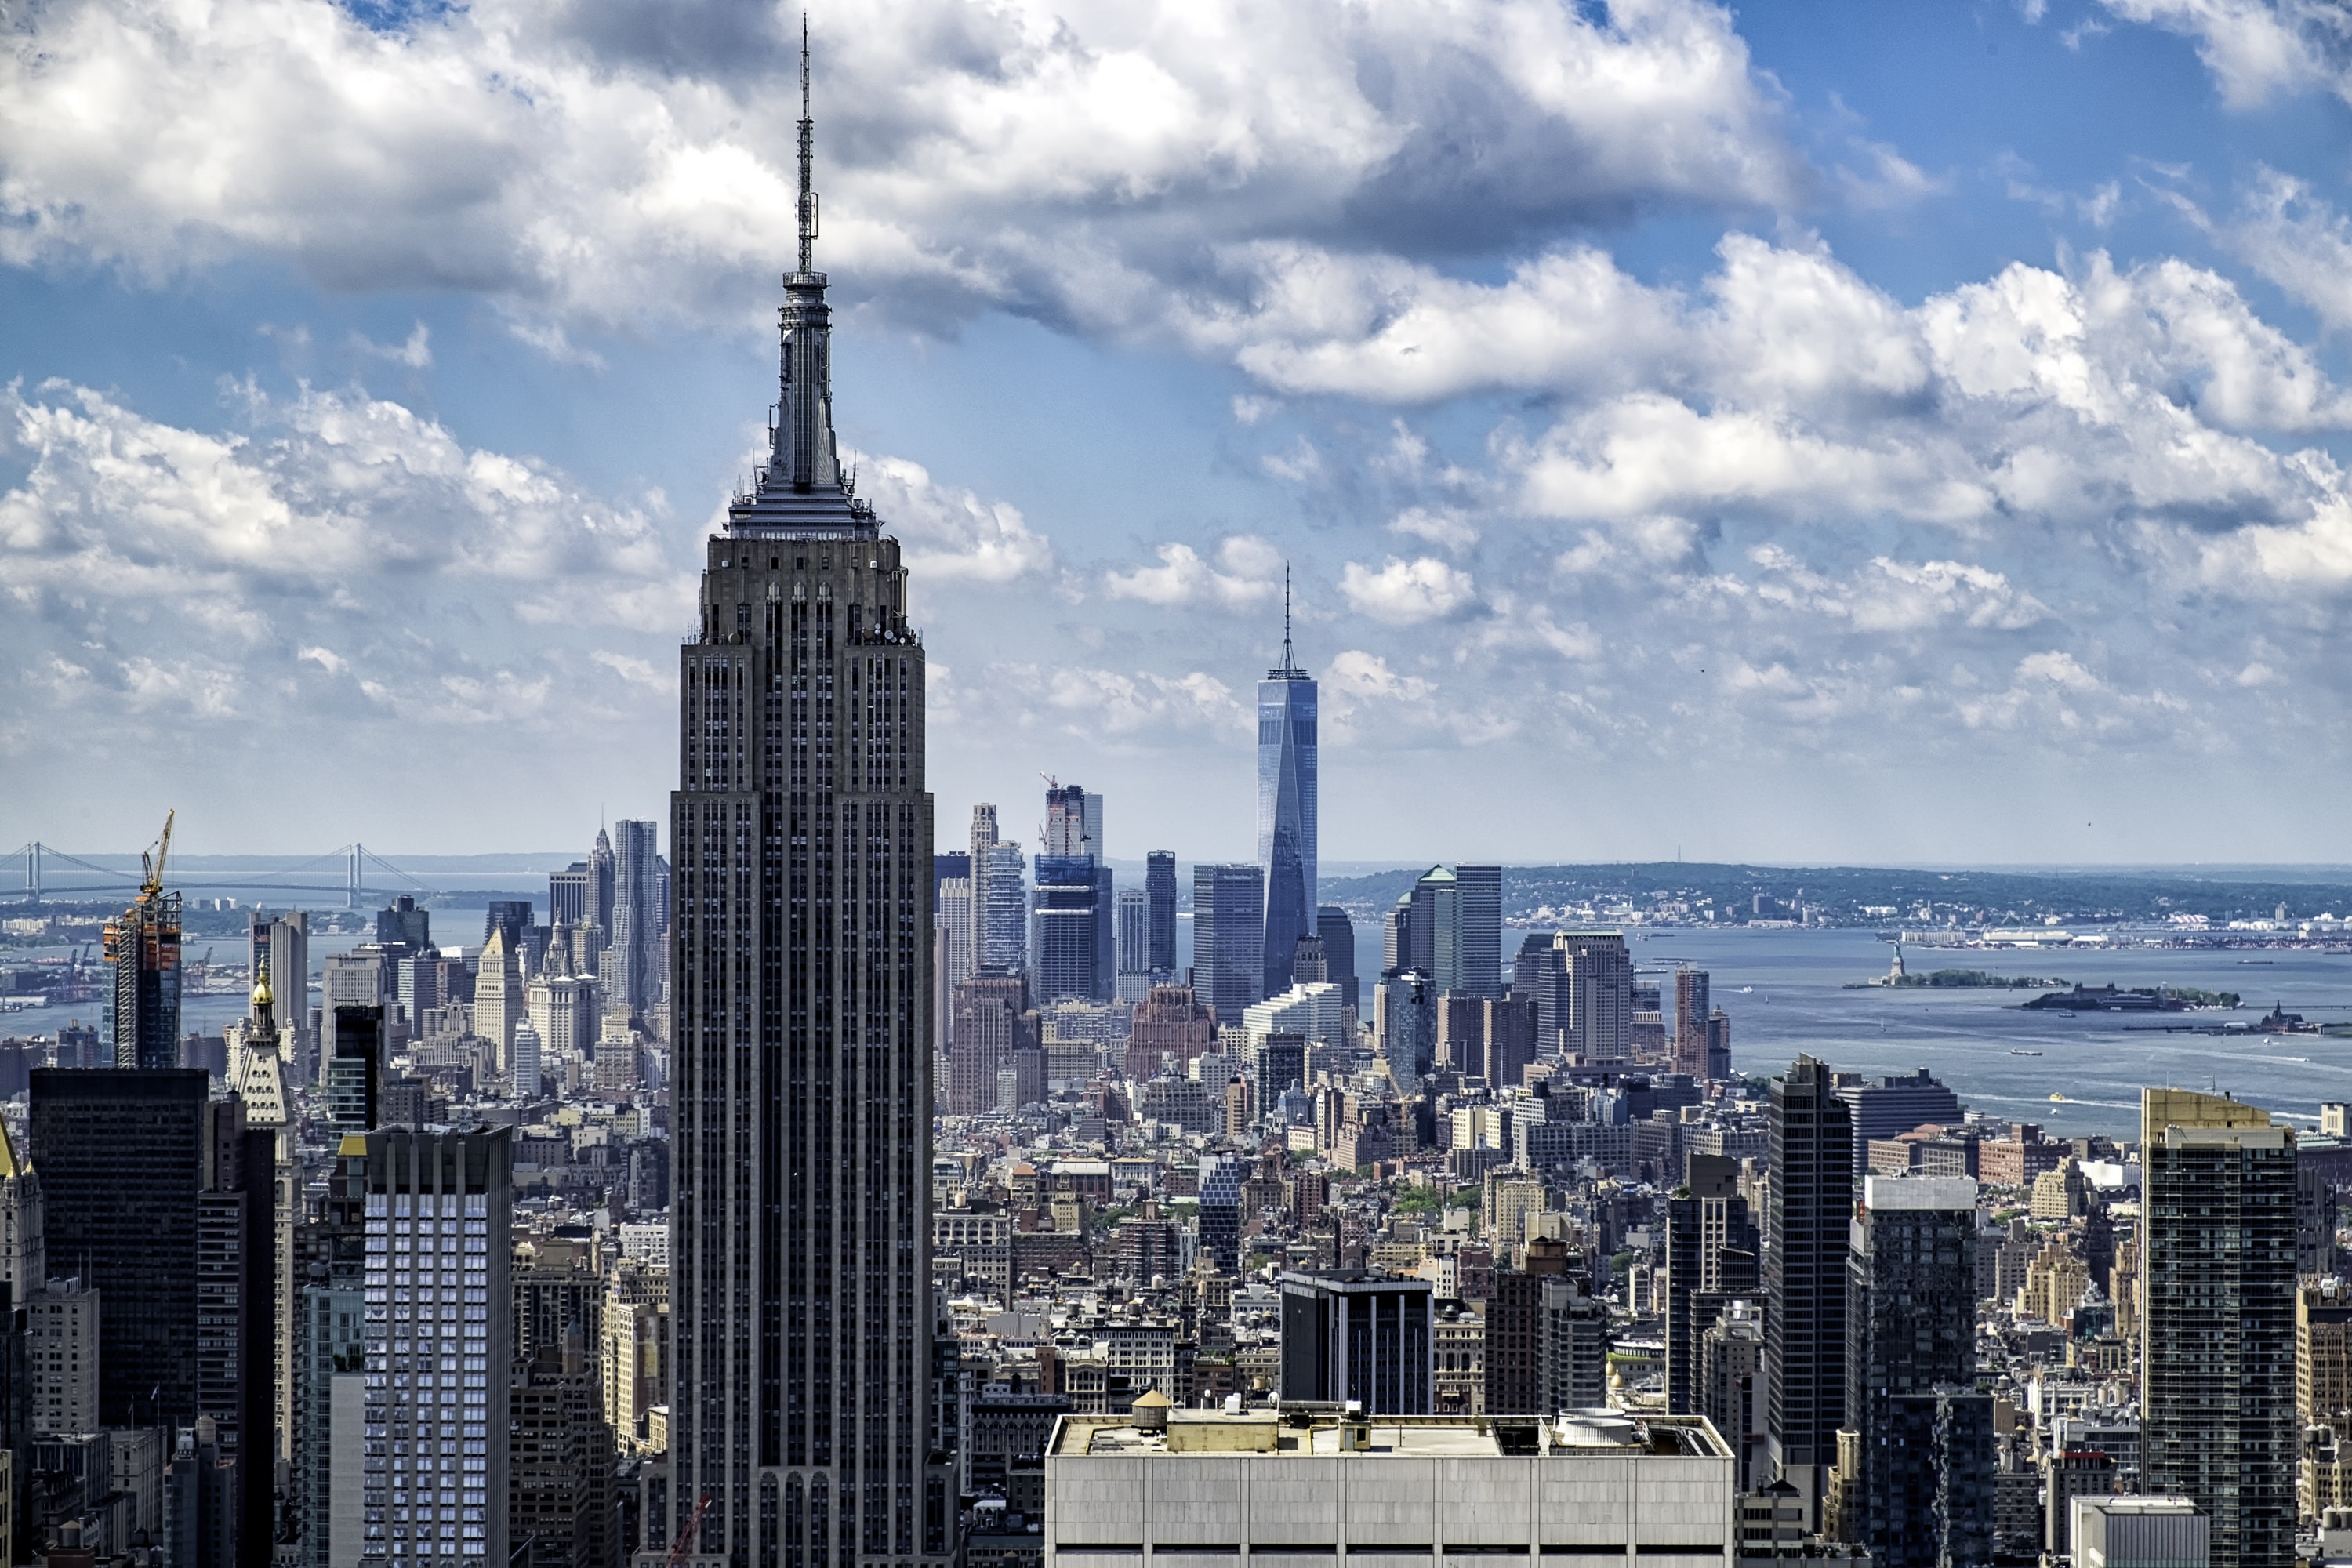 The Empire State Building has a New 102nd Floor Observatory